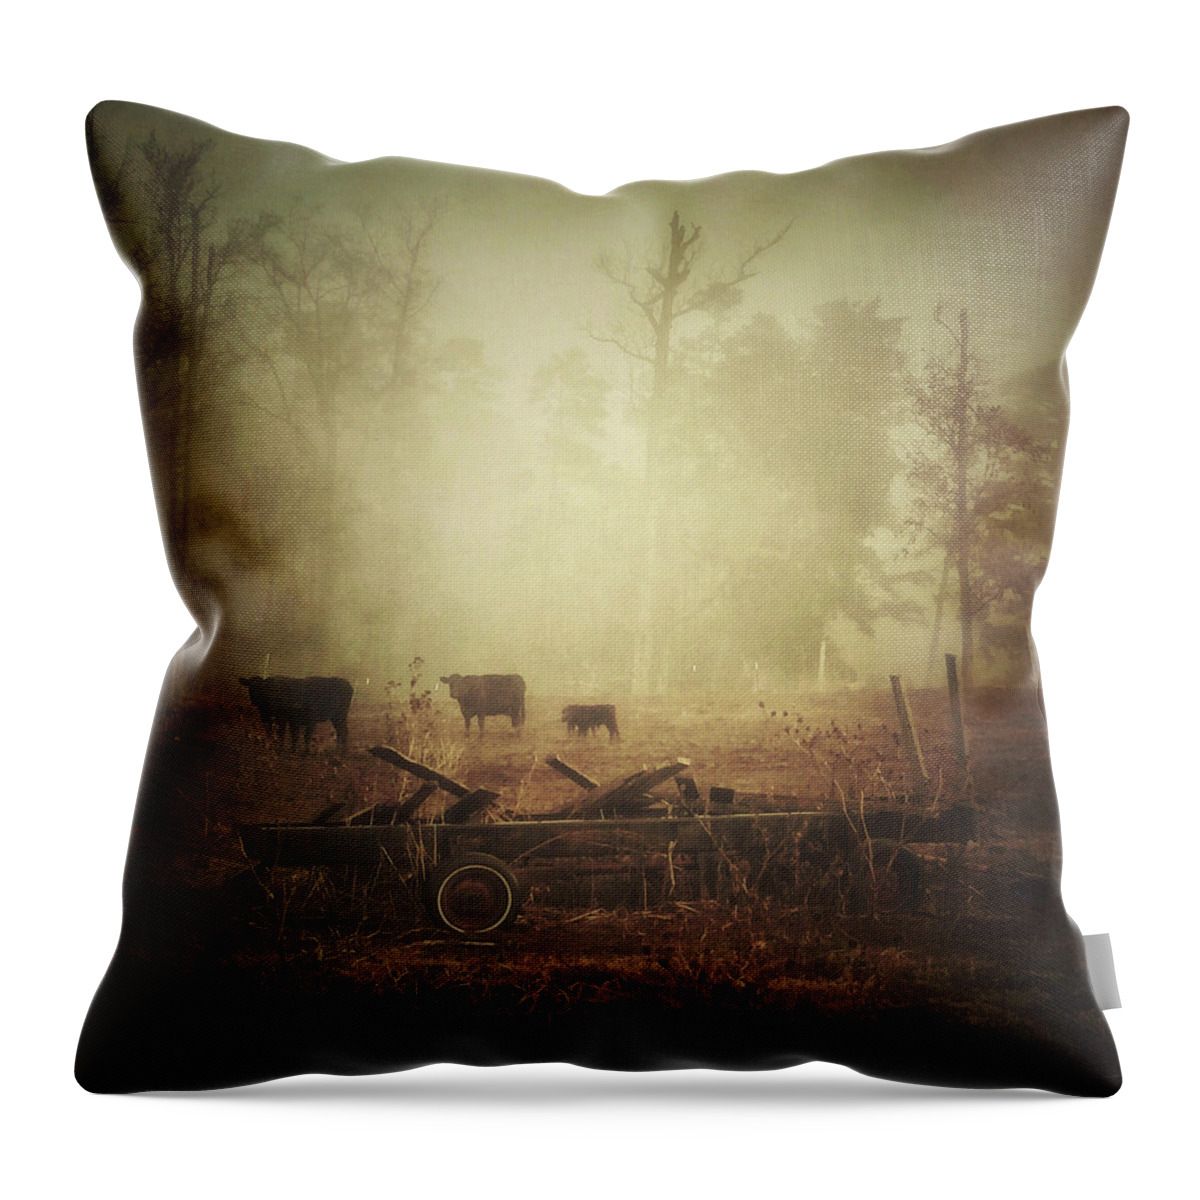 Photography Throw Pillow featuring the photograph Cows, Wagon, Fog by Melissa D Johnston